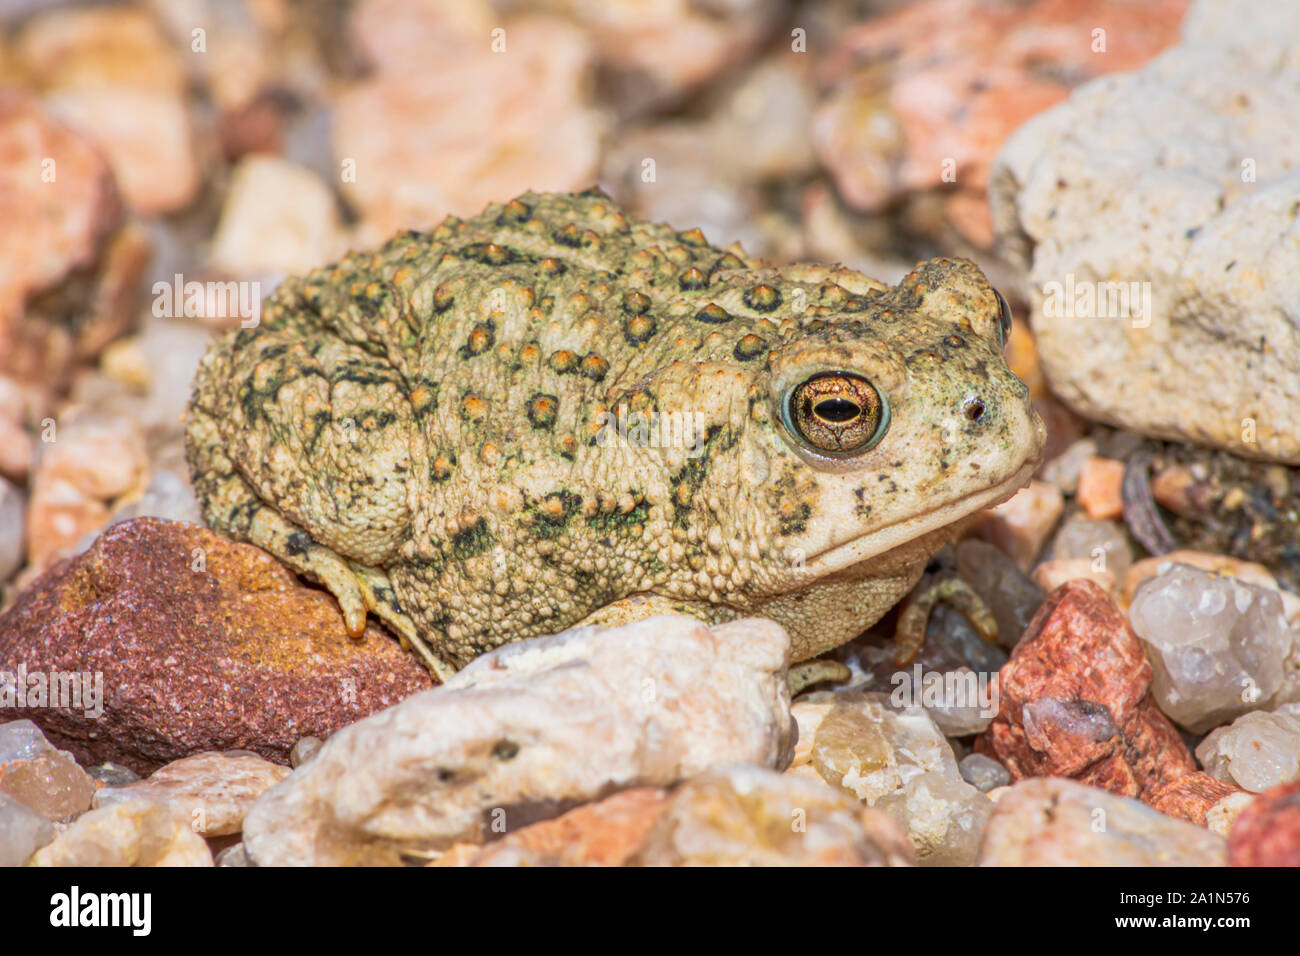 Tiny young Woodhouse's toad barely two inches in length sits in sandy area near East Plum Creek, Castle Rock Colorado US. Photo taken in September. Stock Photo